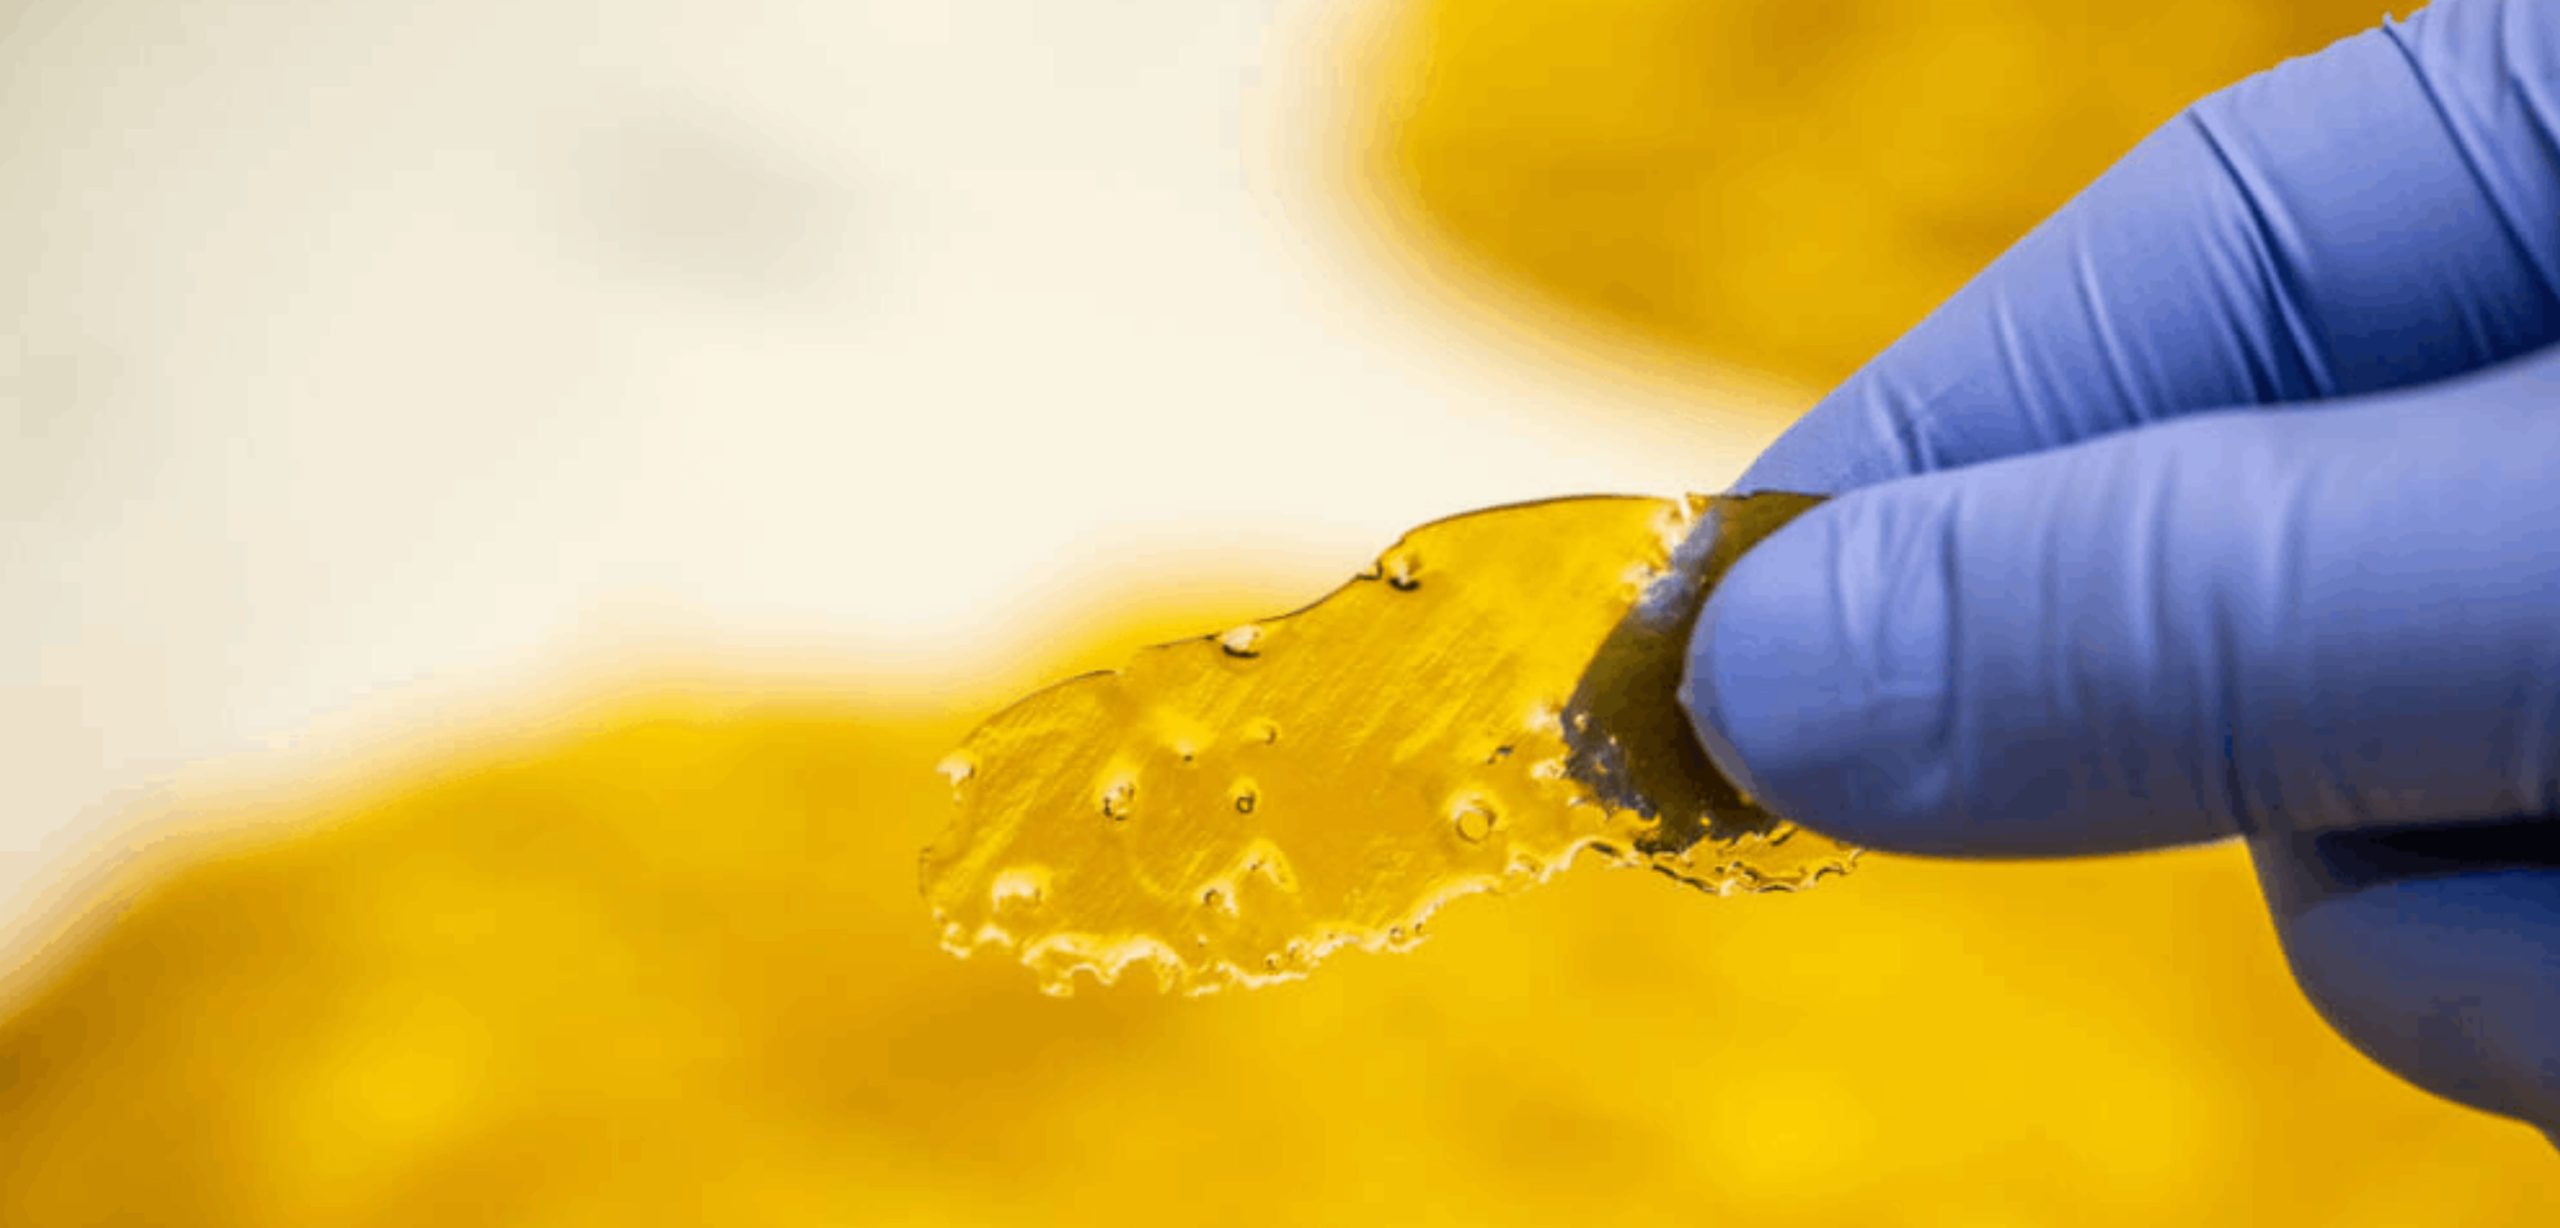 Smoking shatter will make you feel effects similar to smoking weed, just a little more intense. The specific high you experience will depend on whether the batch was prepared using an indica or a sativa. 